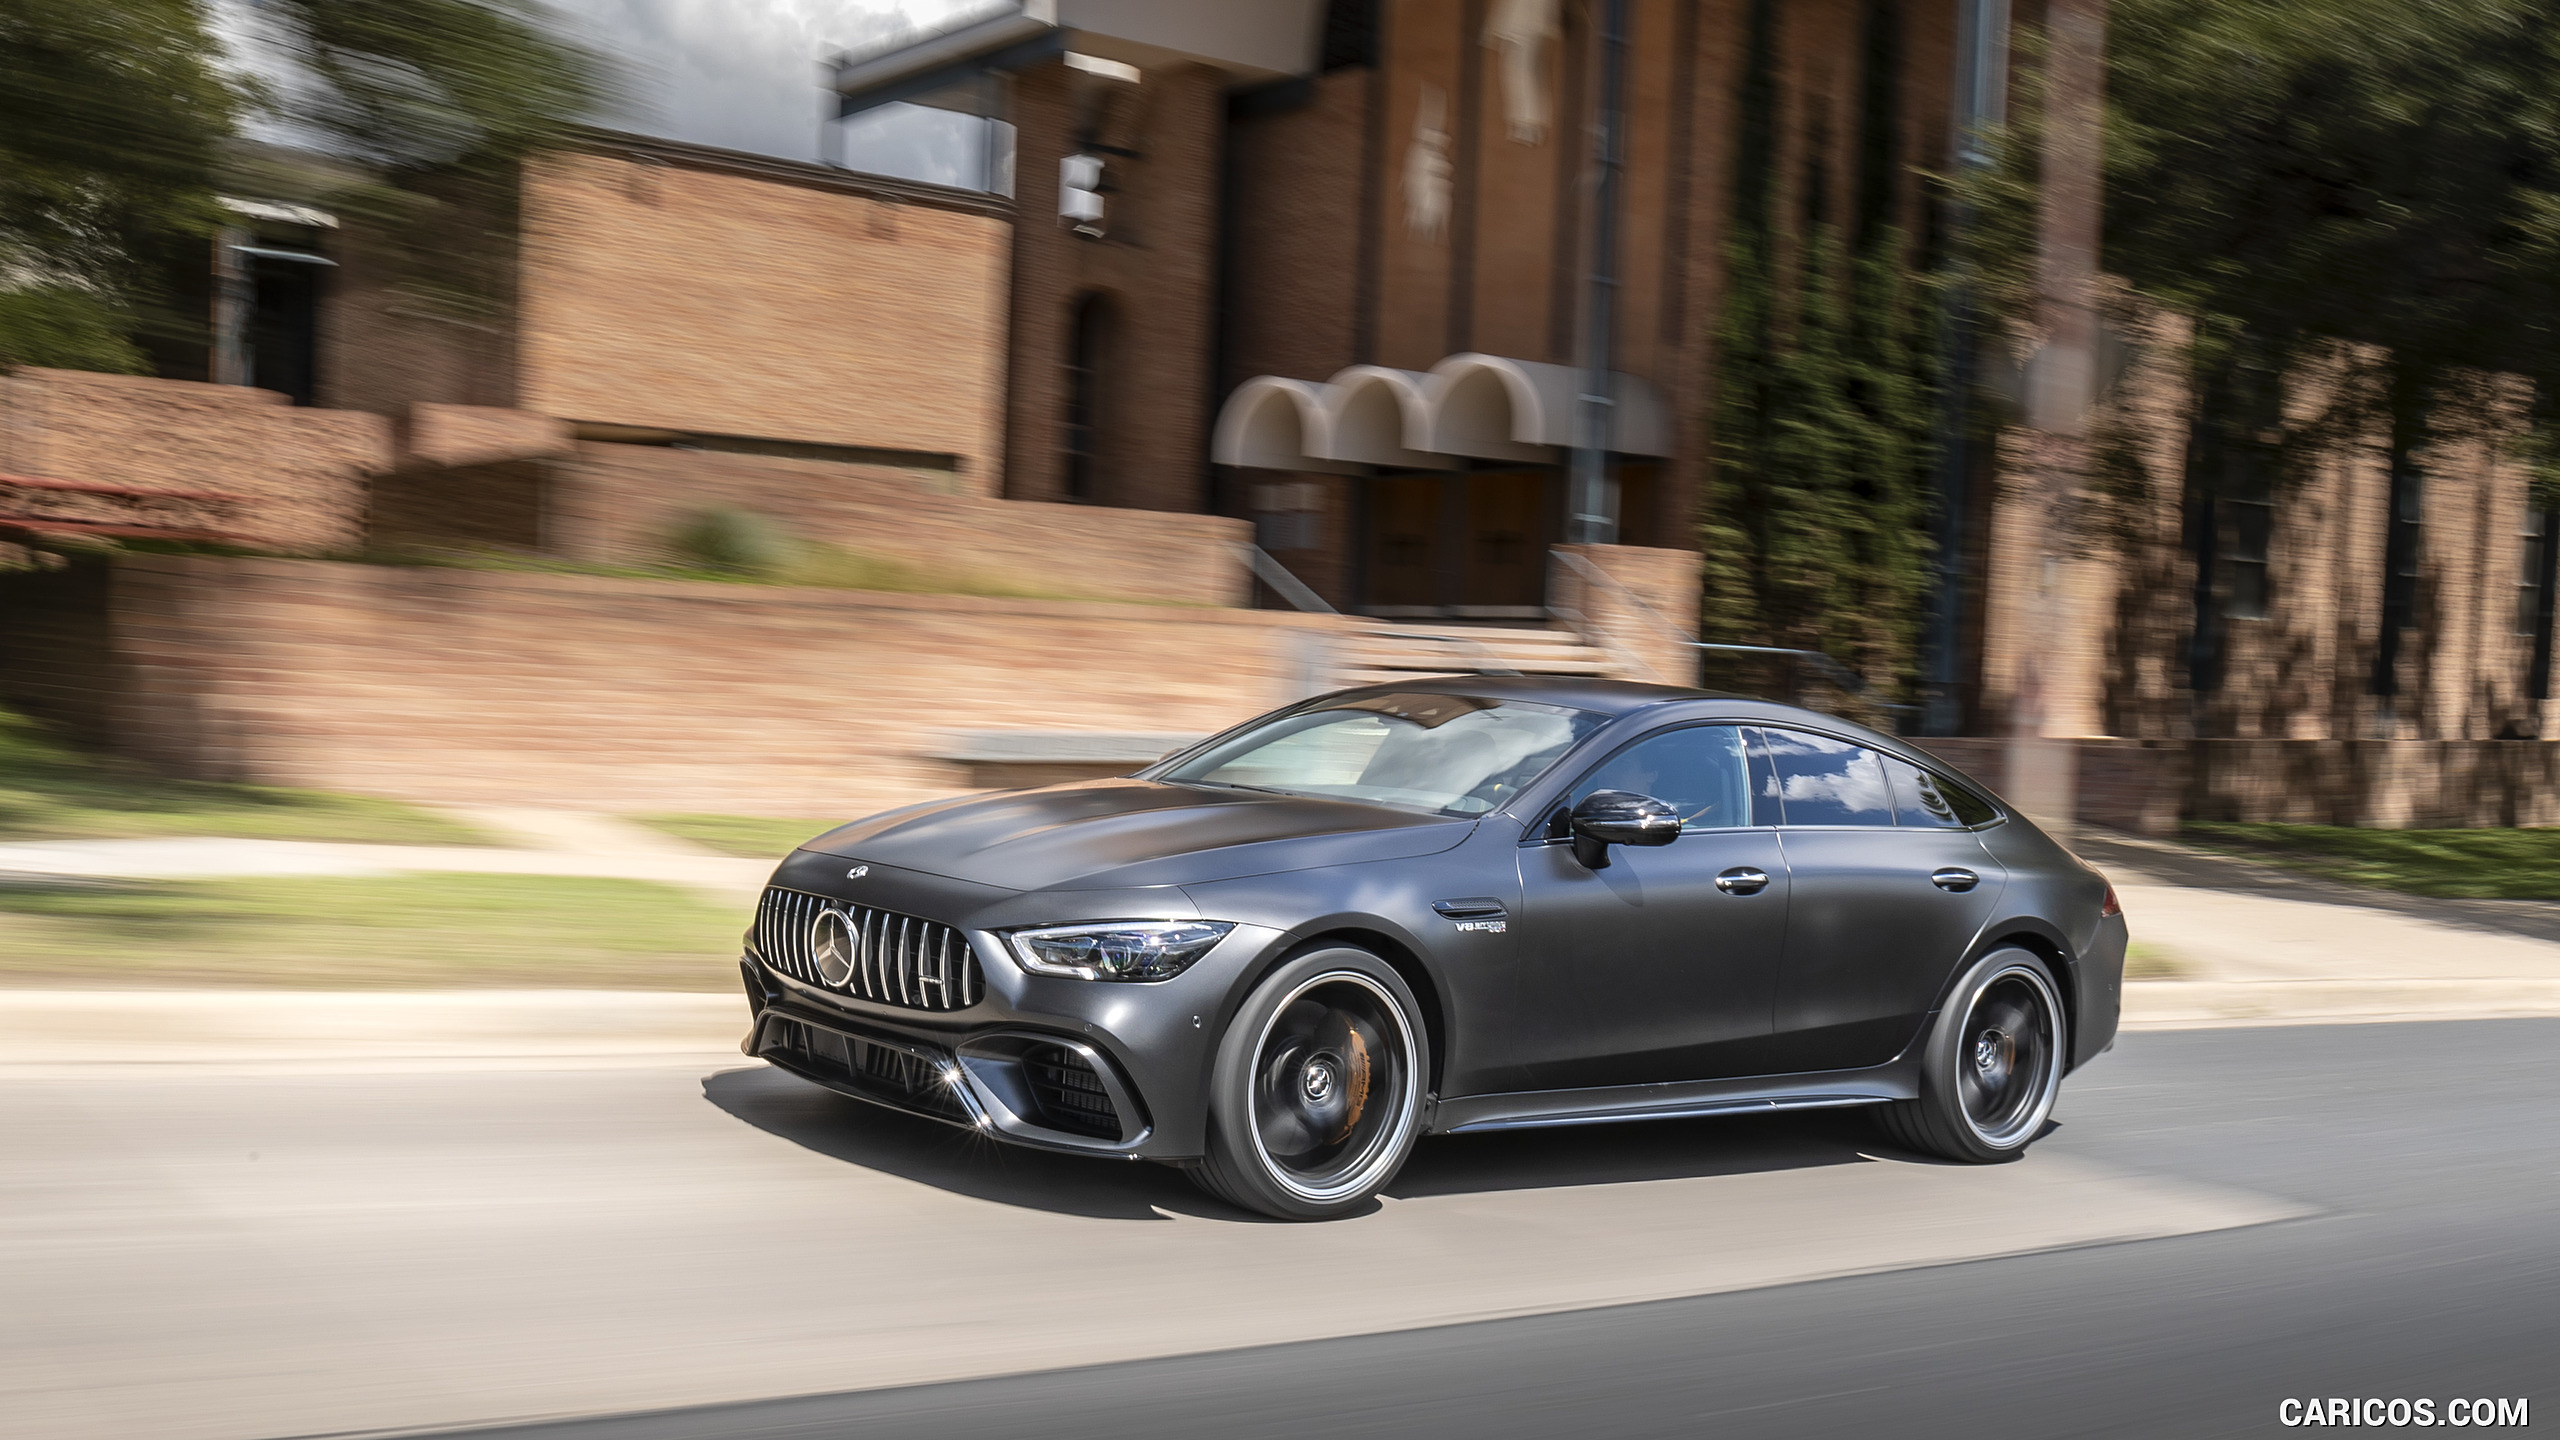 2019 Mercedes-AMG GT 63 S 4MATIC+ 4-Door Coupe - Front Three-Quarter, #203 of 427